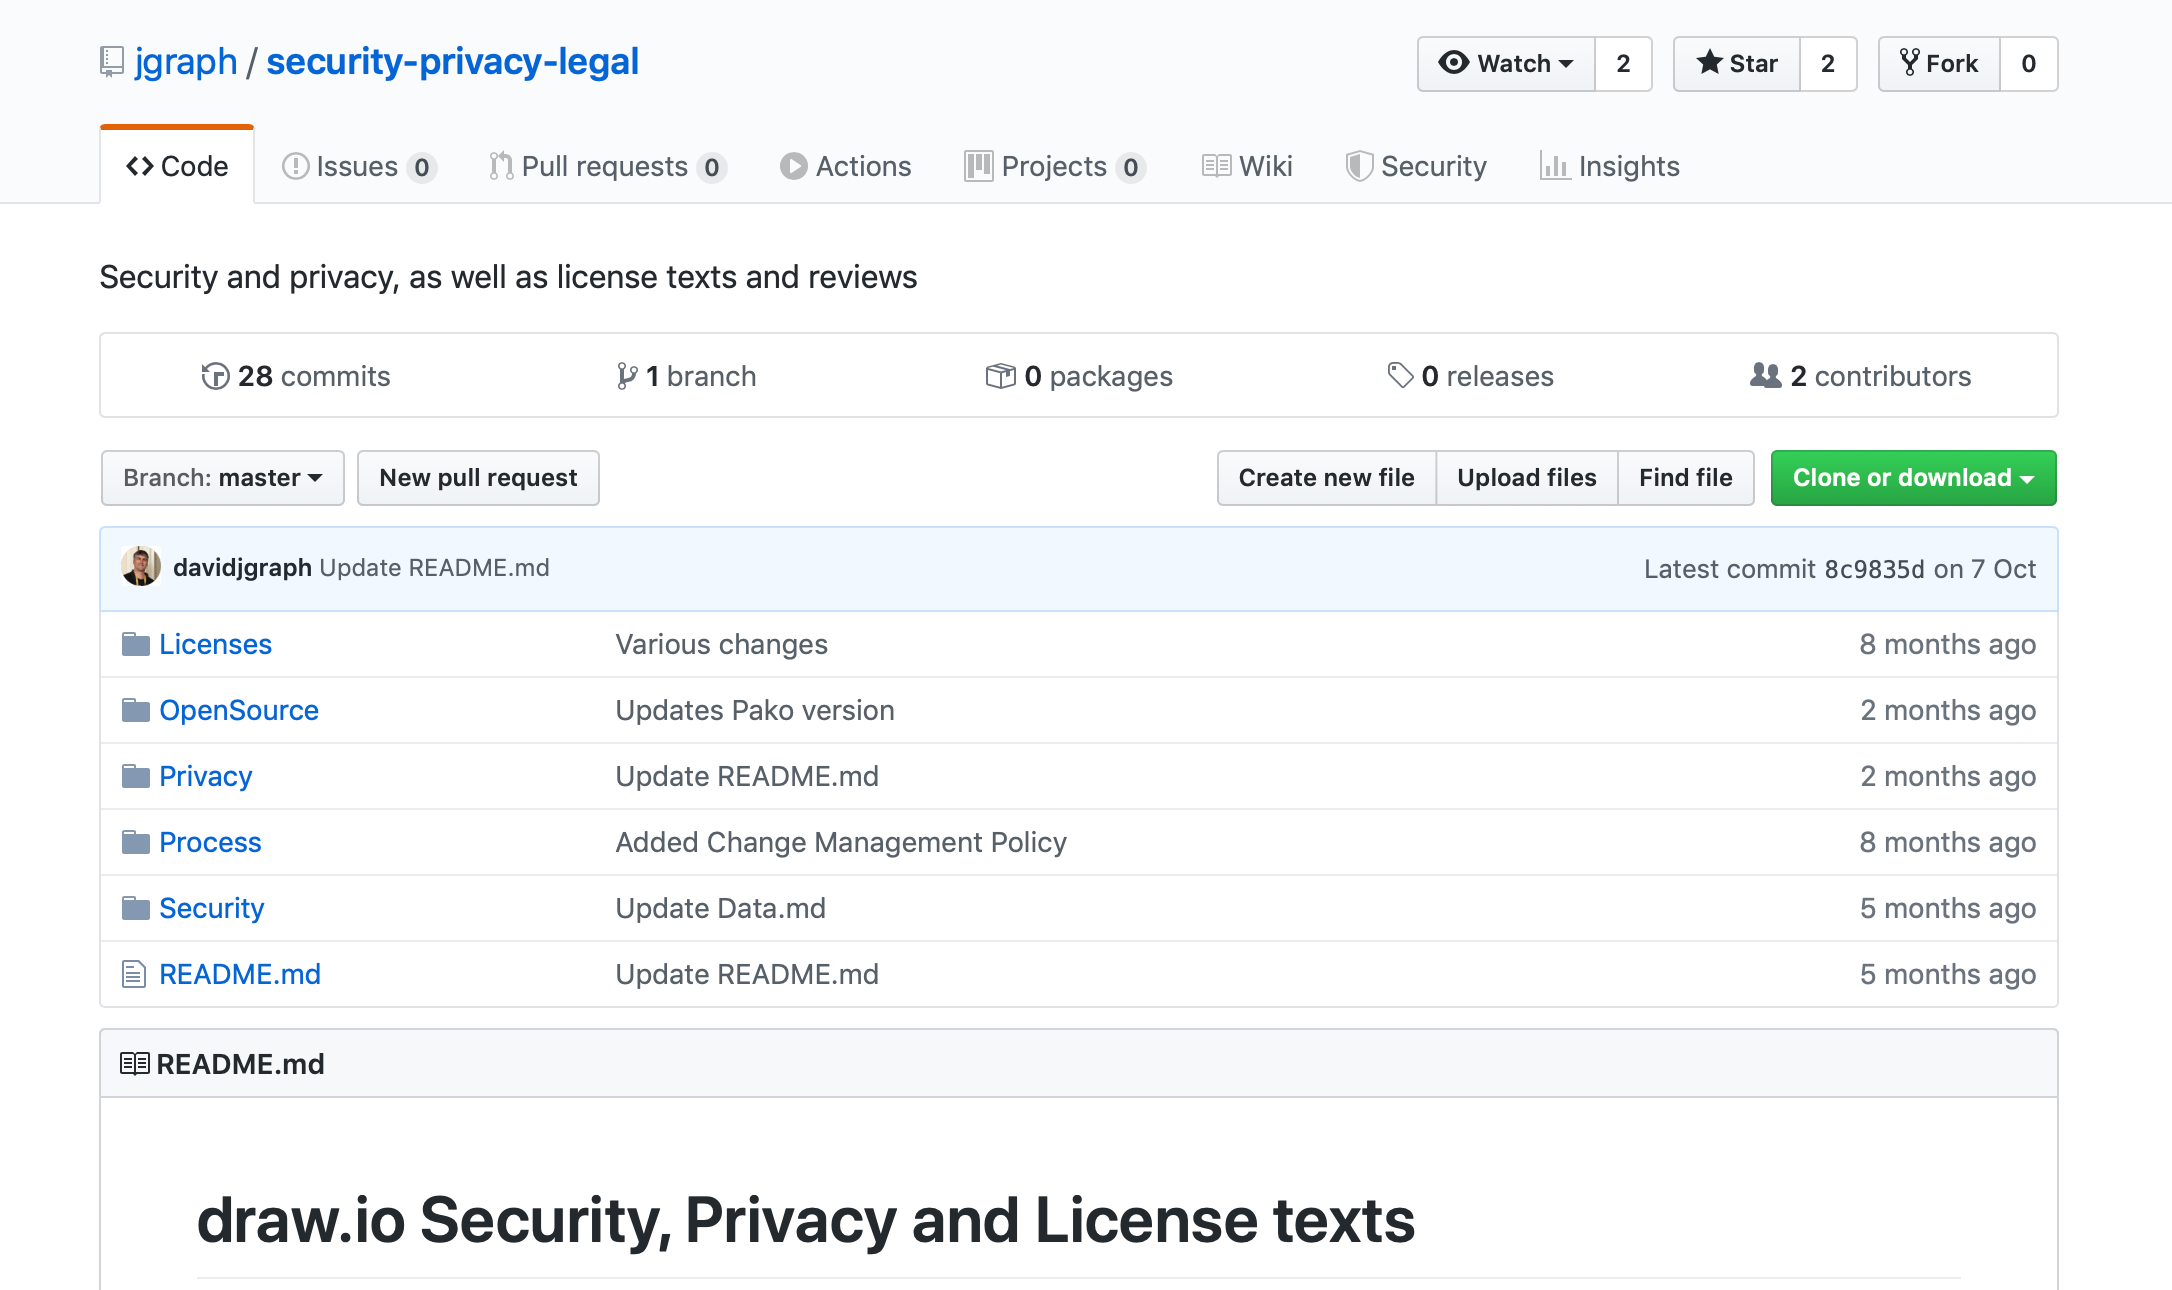 draw.io's versioned security, privacy and legal documentation on GitHub